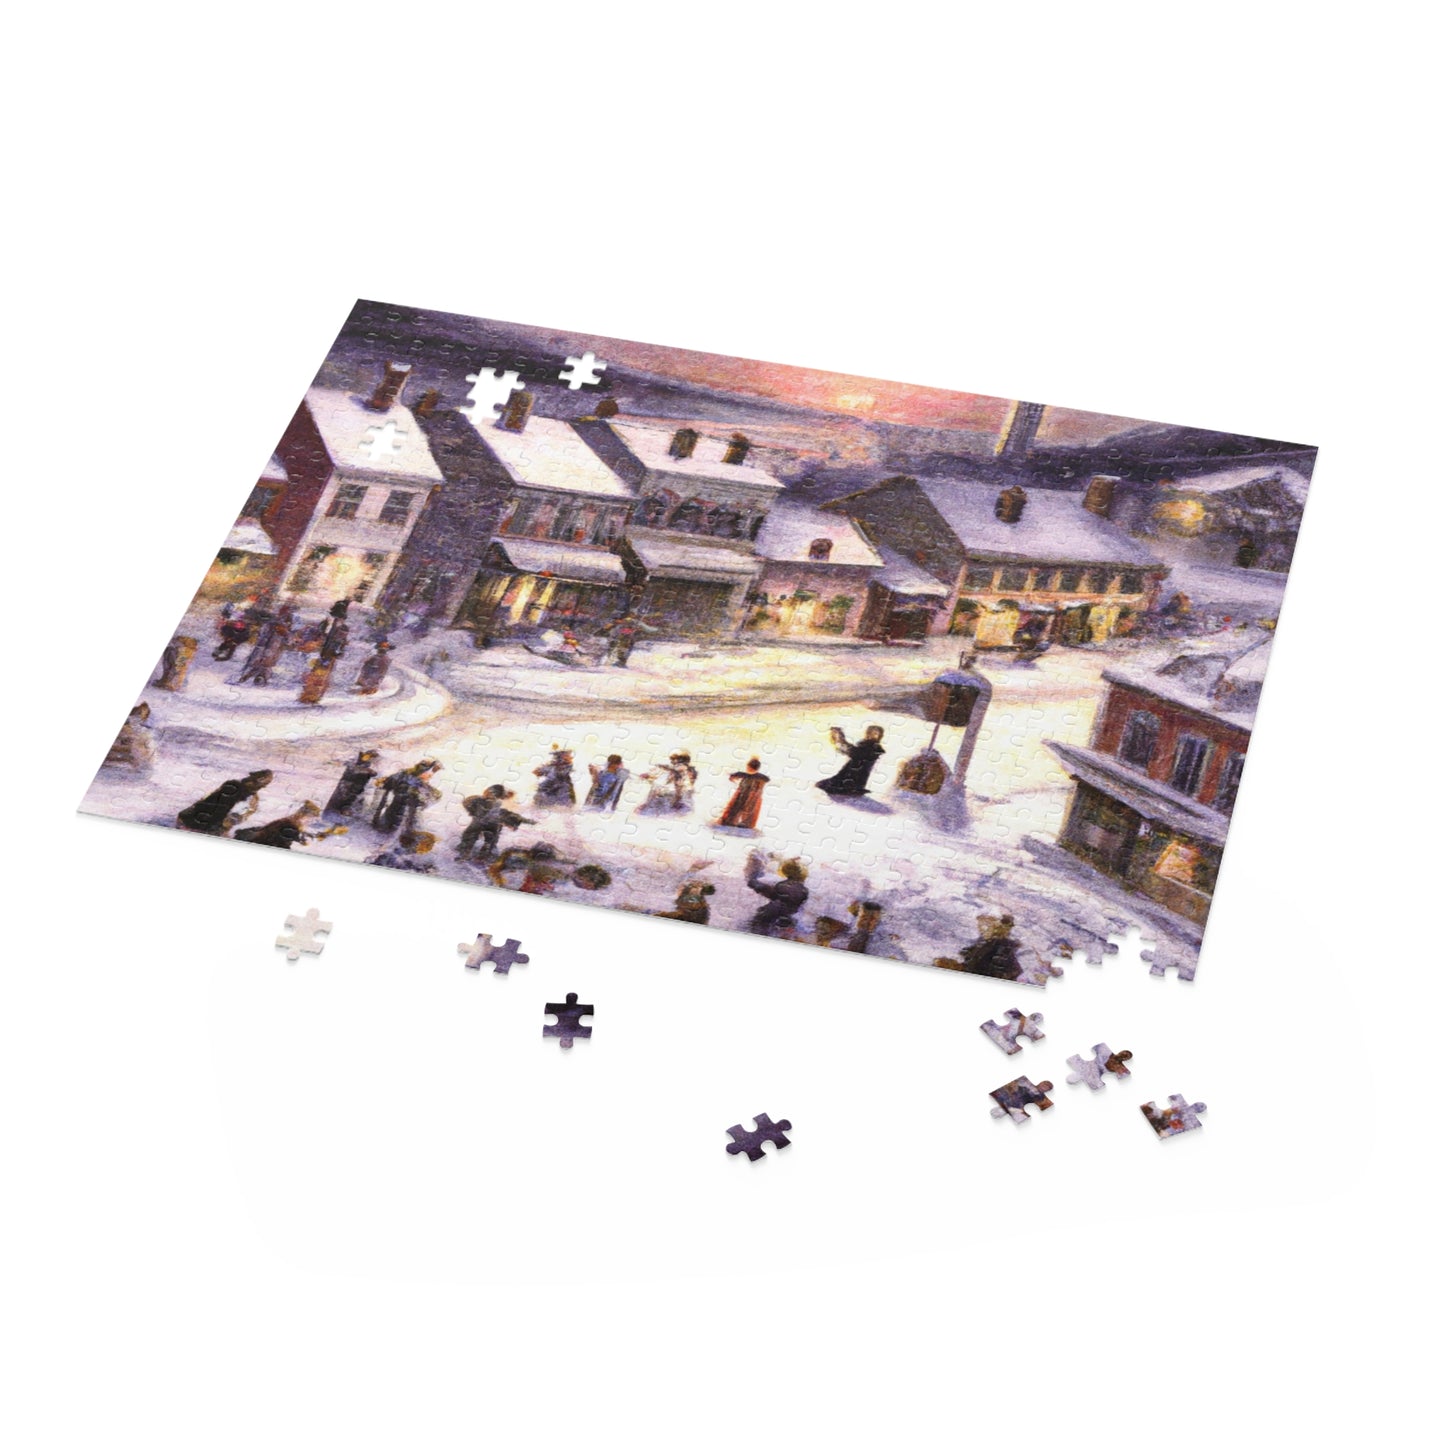 Vintage Christmas Village - JigSaw Puzzle 500 Piece: Adella Wintertree - Christmas Gift | Holiday Scenes